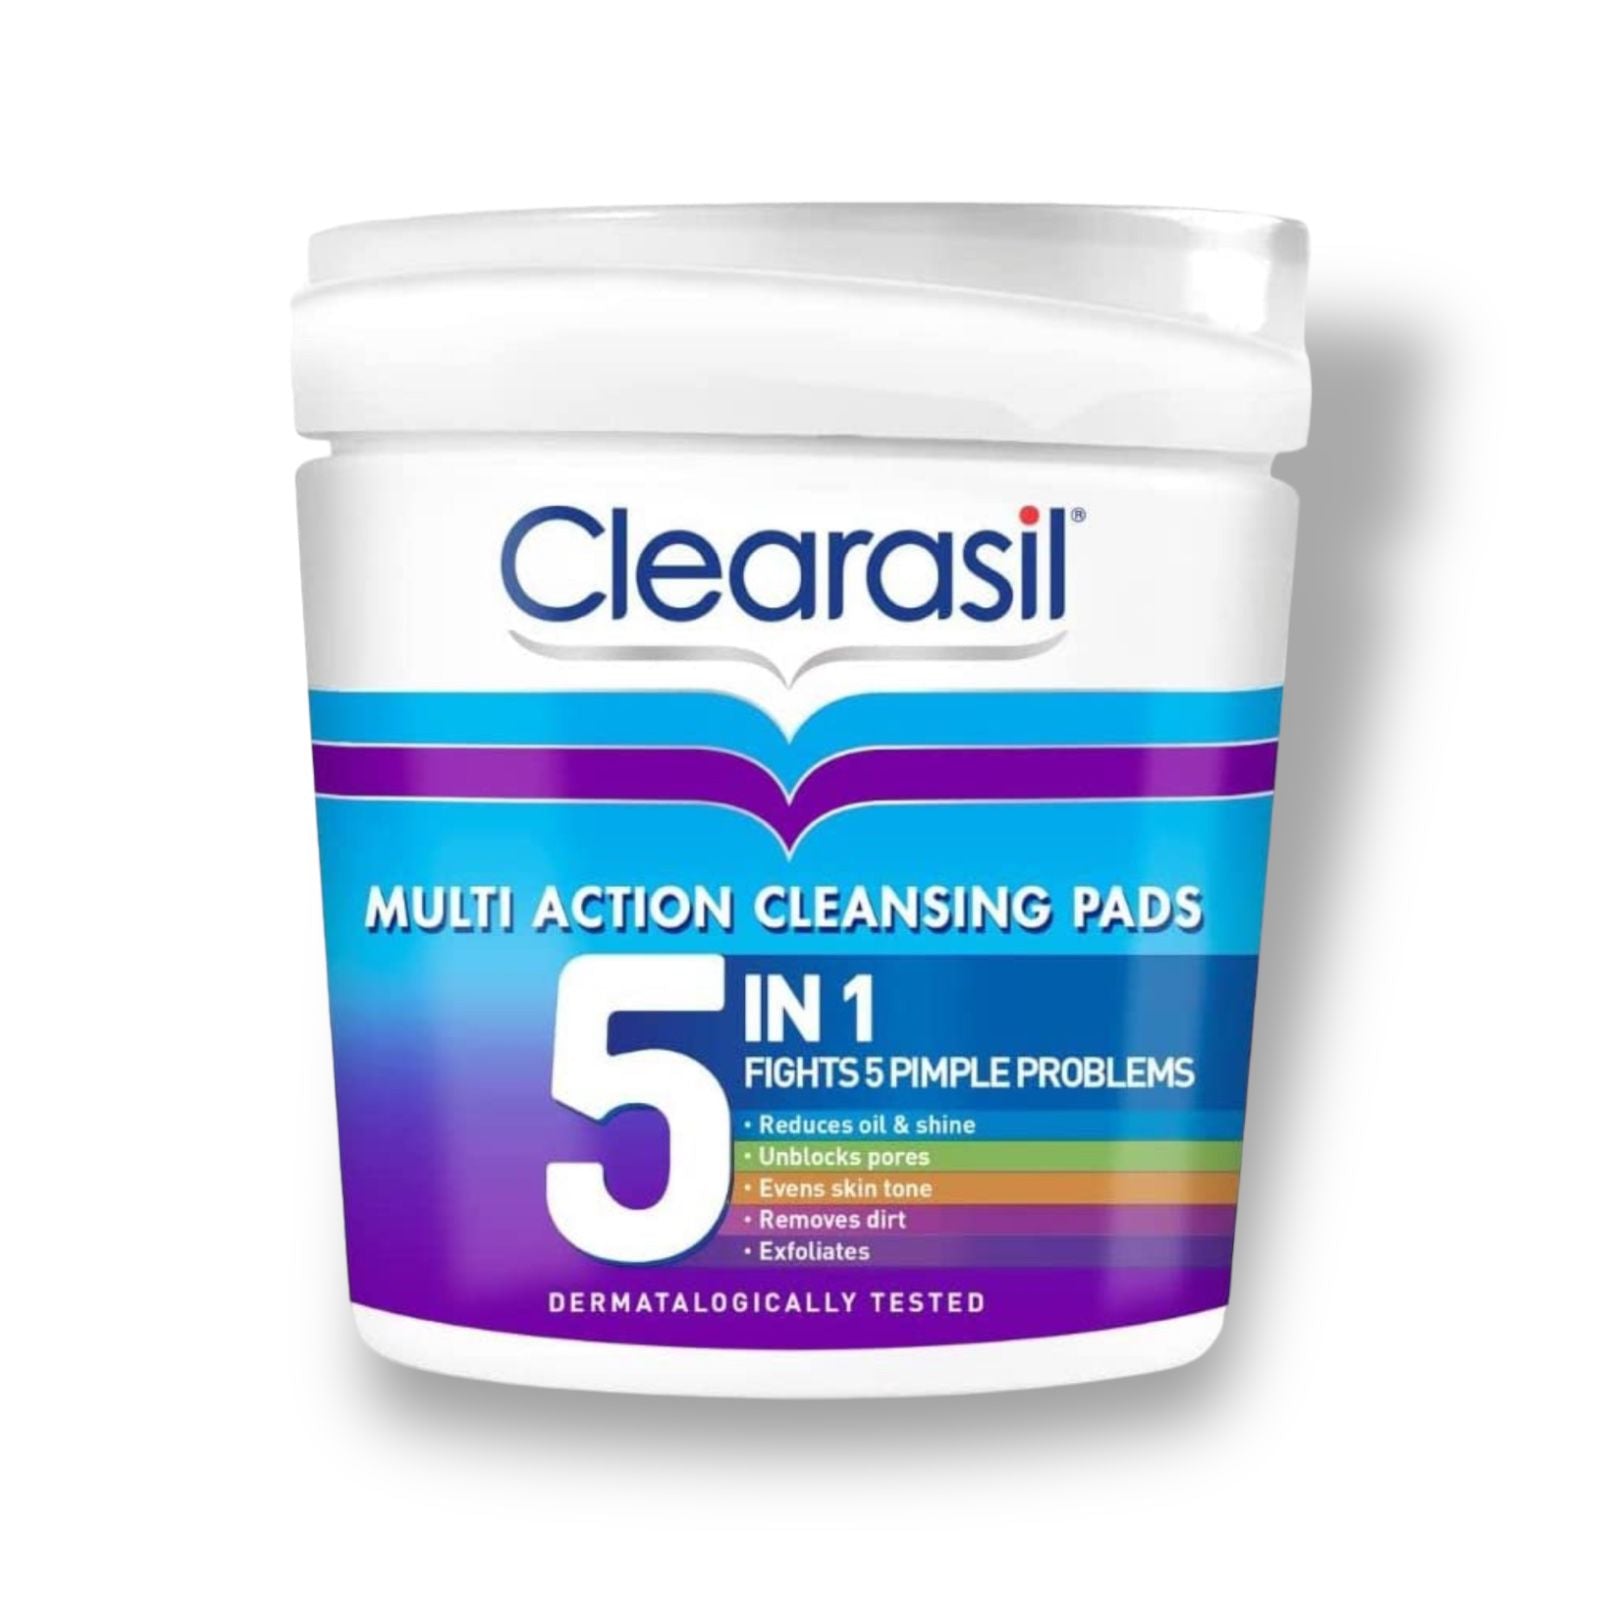 CLEARASIL - MULTI ACTION CLEANSING PADS